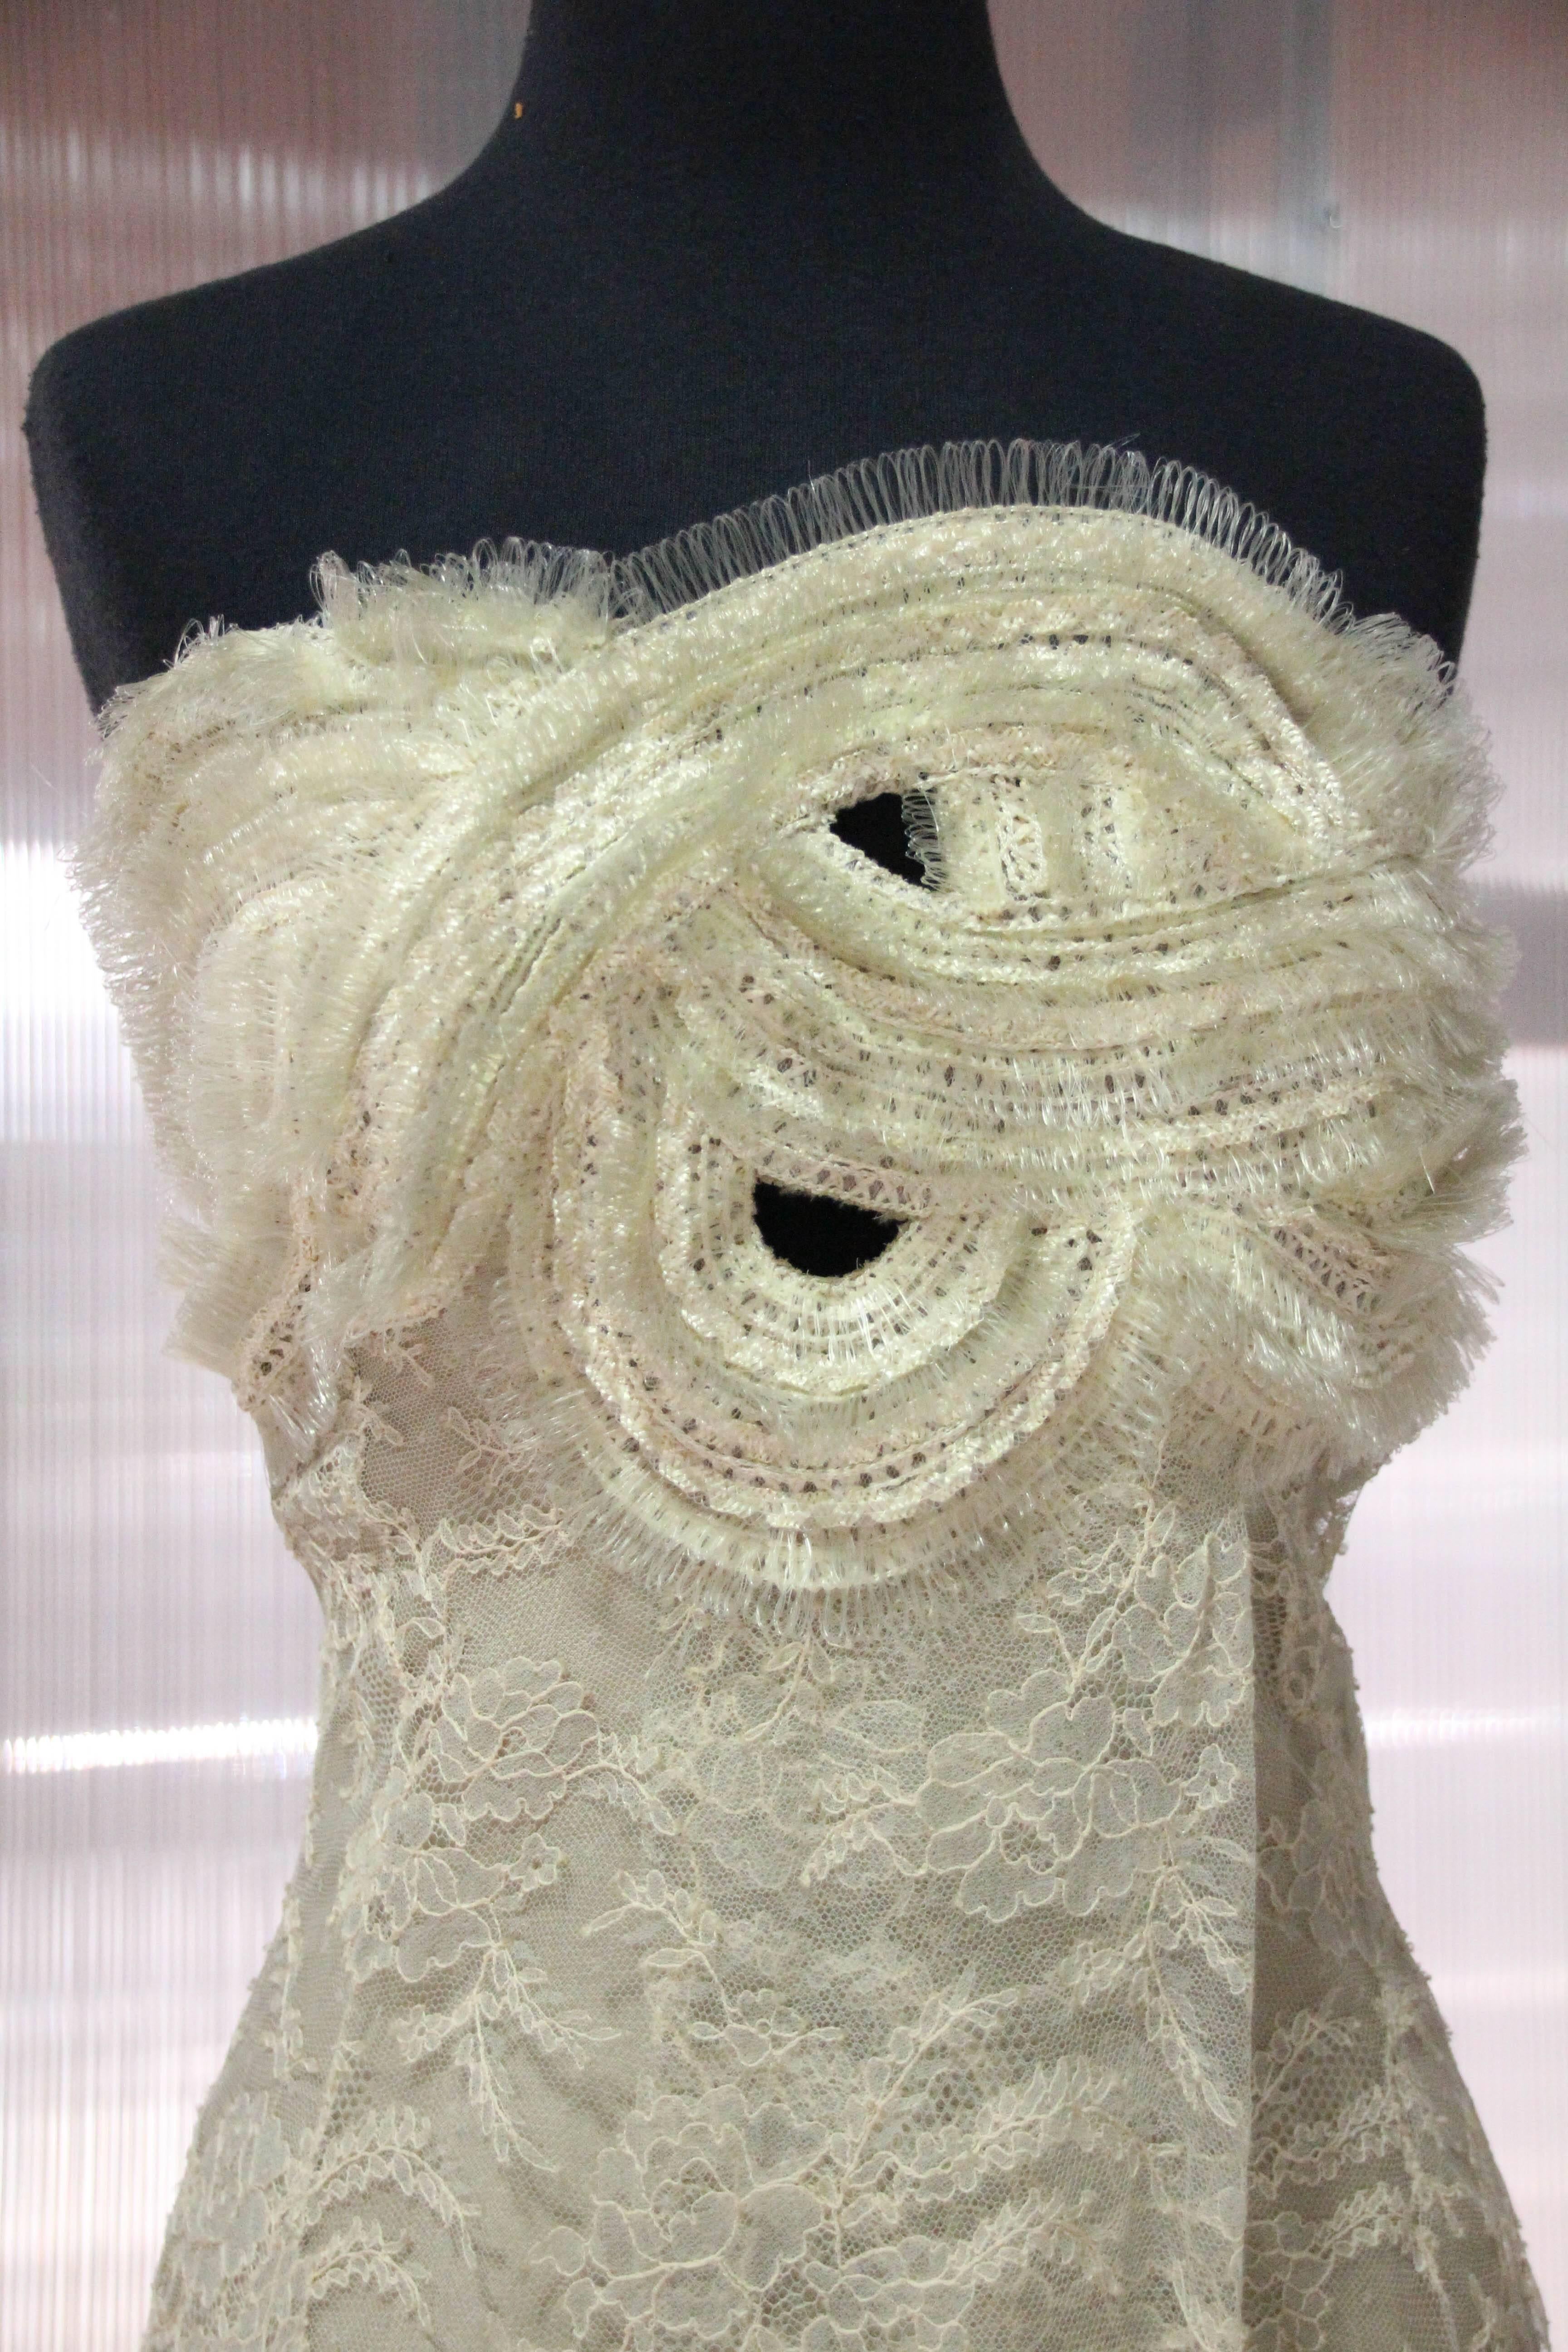 1990s Gianfranco Ferre ecru French lace and horsehair braid structured strapless gown with bodice peek-a-boo sections formed by serpentine braid work.  Overlay lace wrap front with high slit. Fully lined in silk charmeuse. Side zipper and hook and